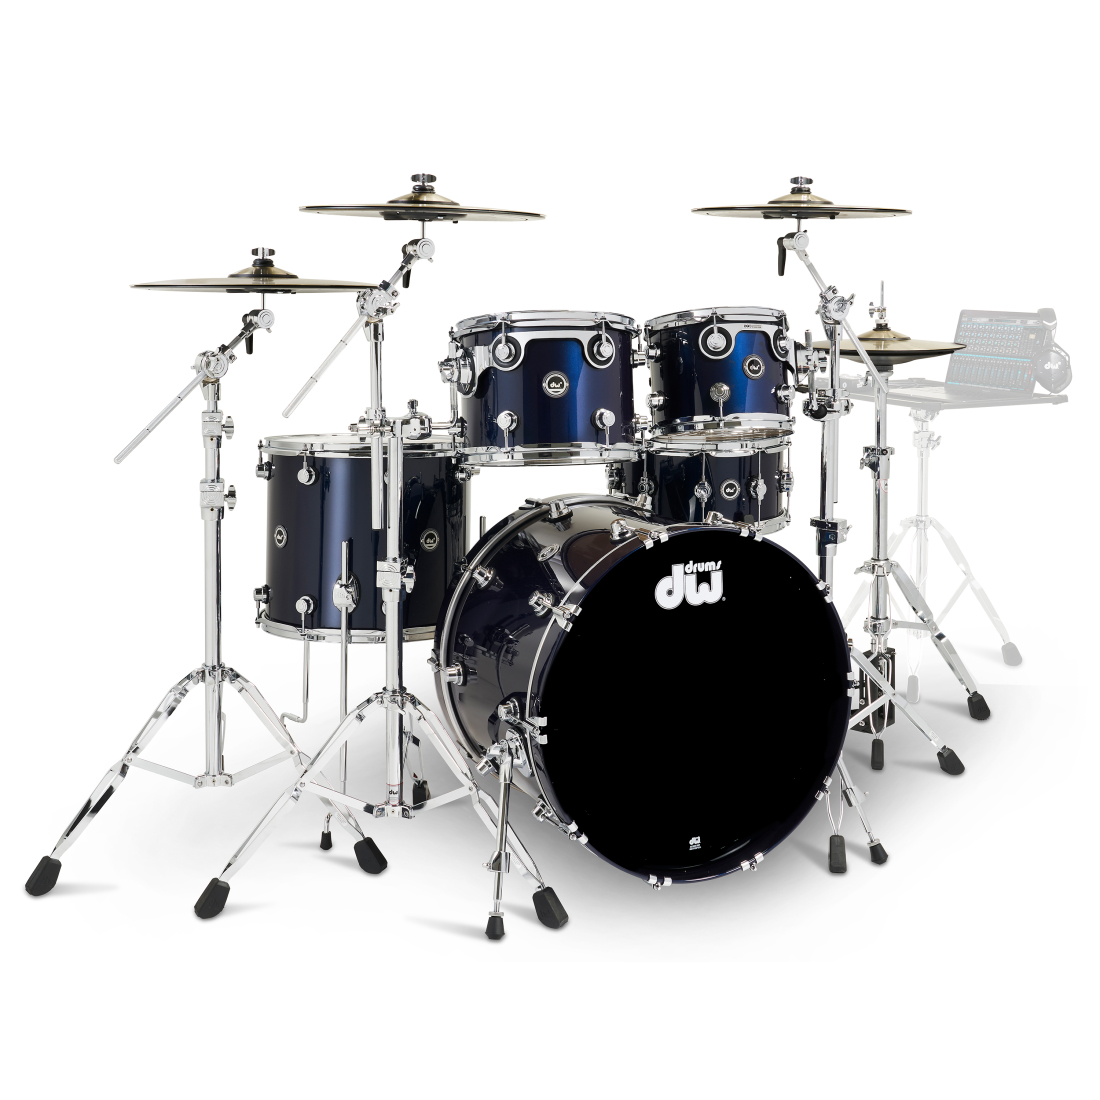 DWe 5-Piece Drumset with Cymbals and Hardware - Midnight Blue Metallic